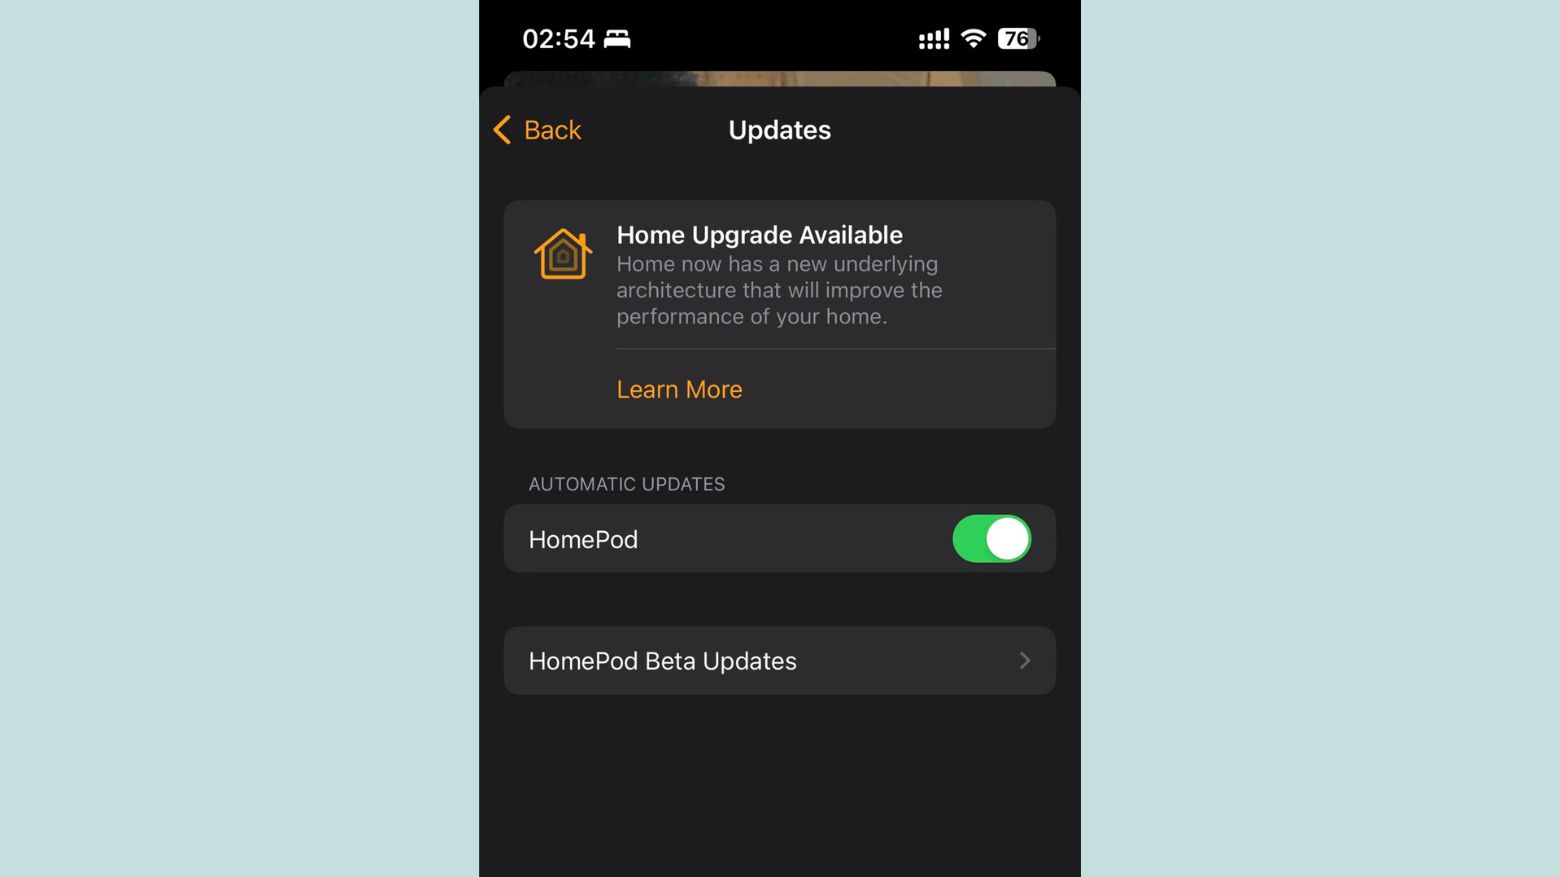 iOS 16.2 will upgrade the Home app's architecture